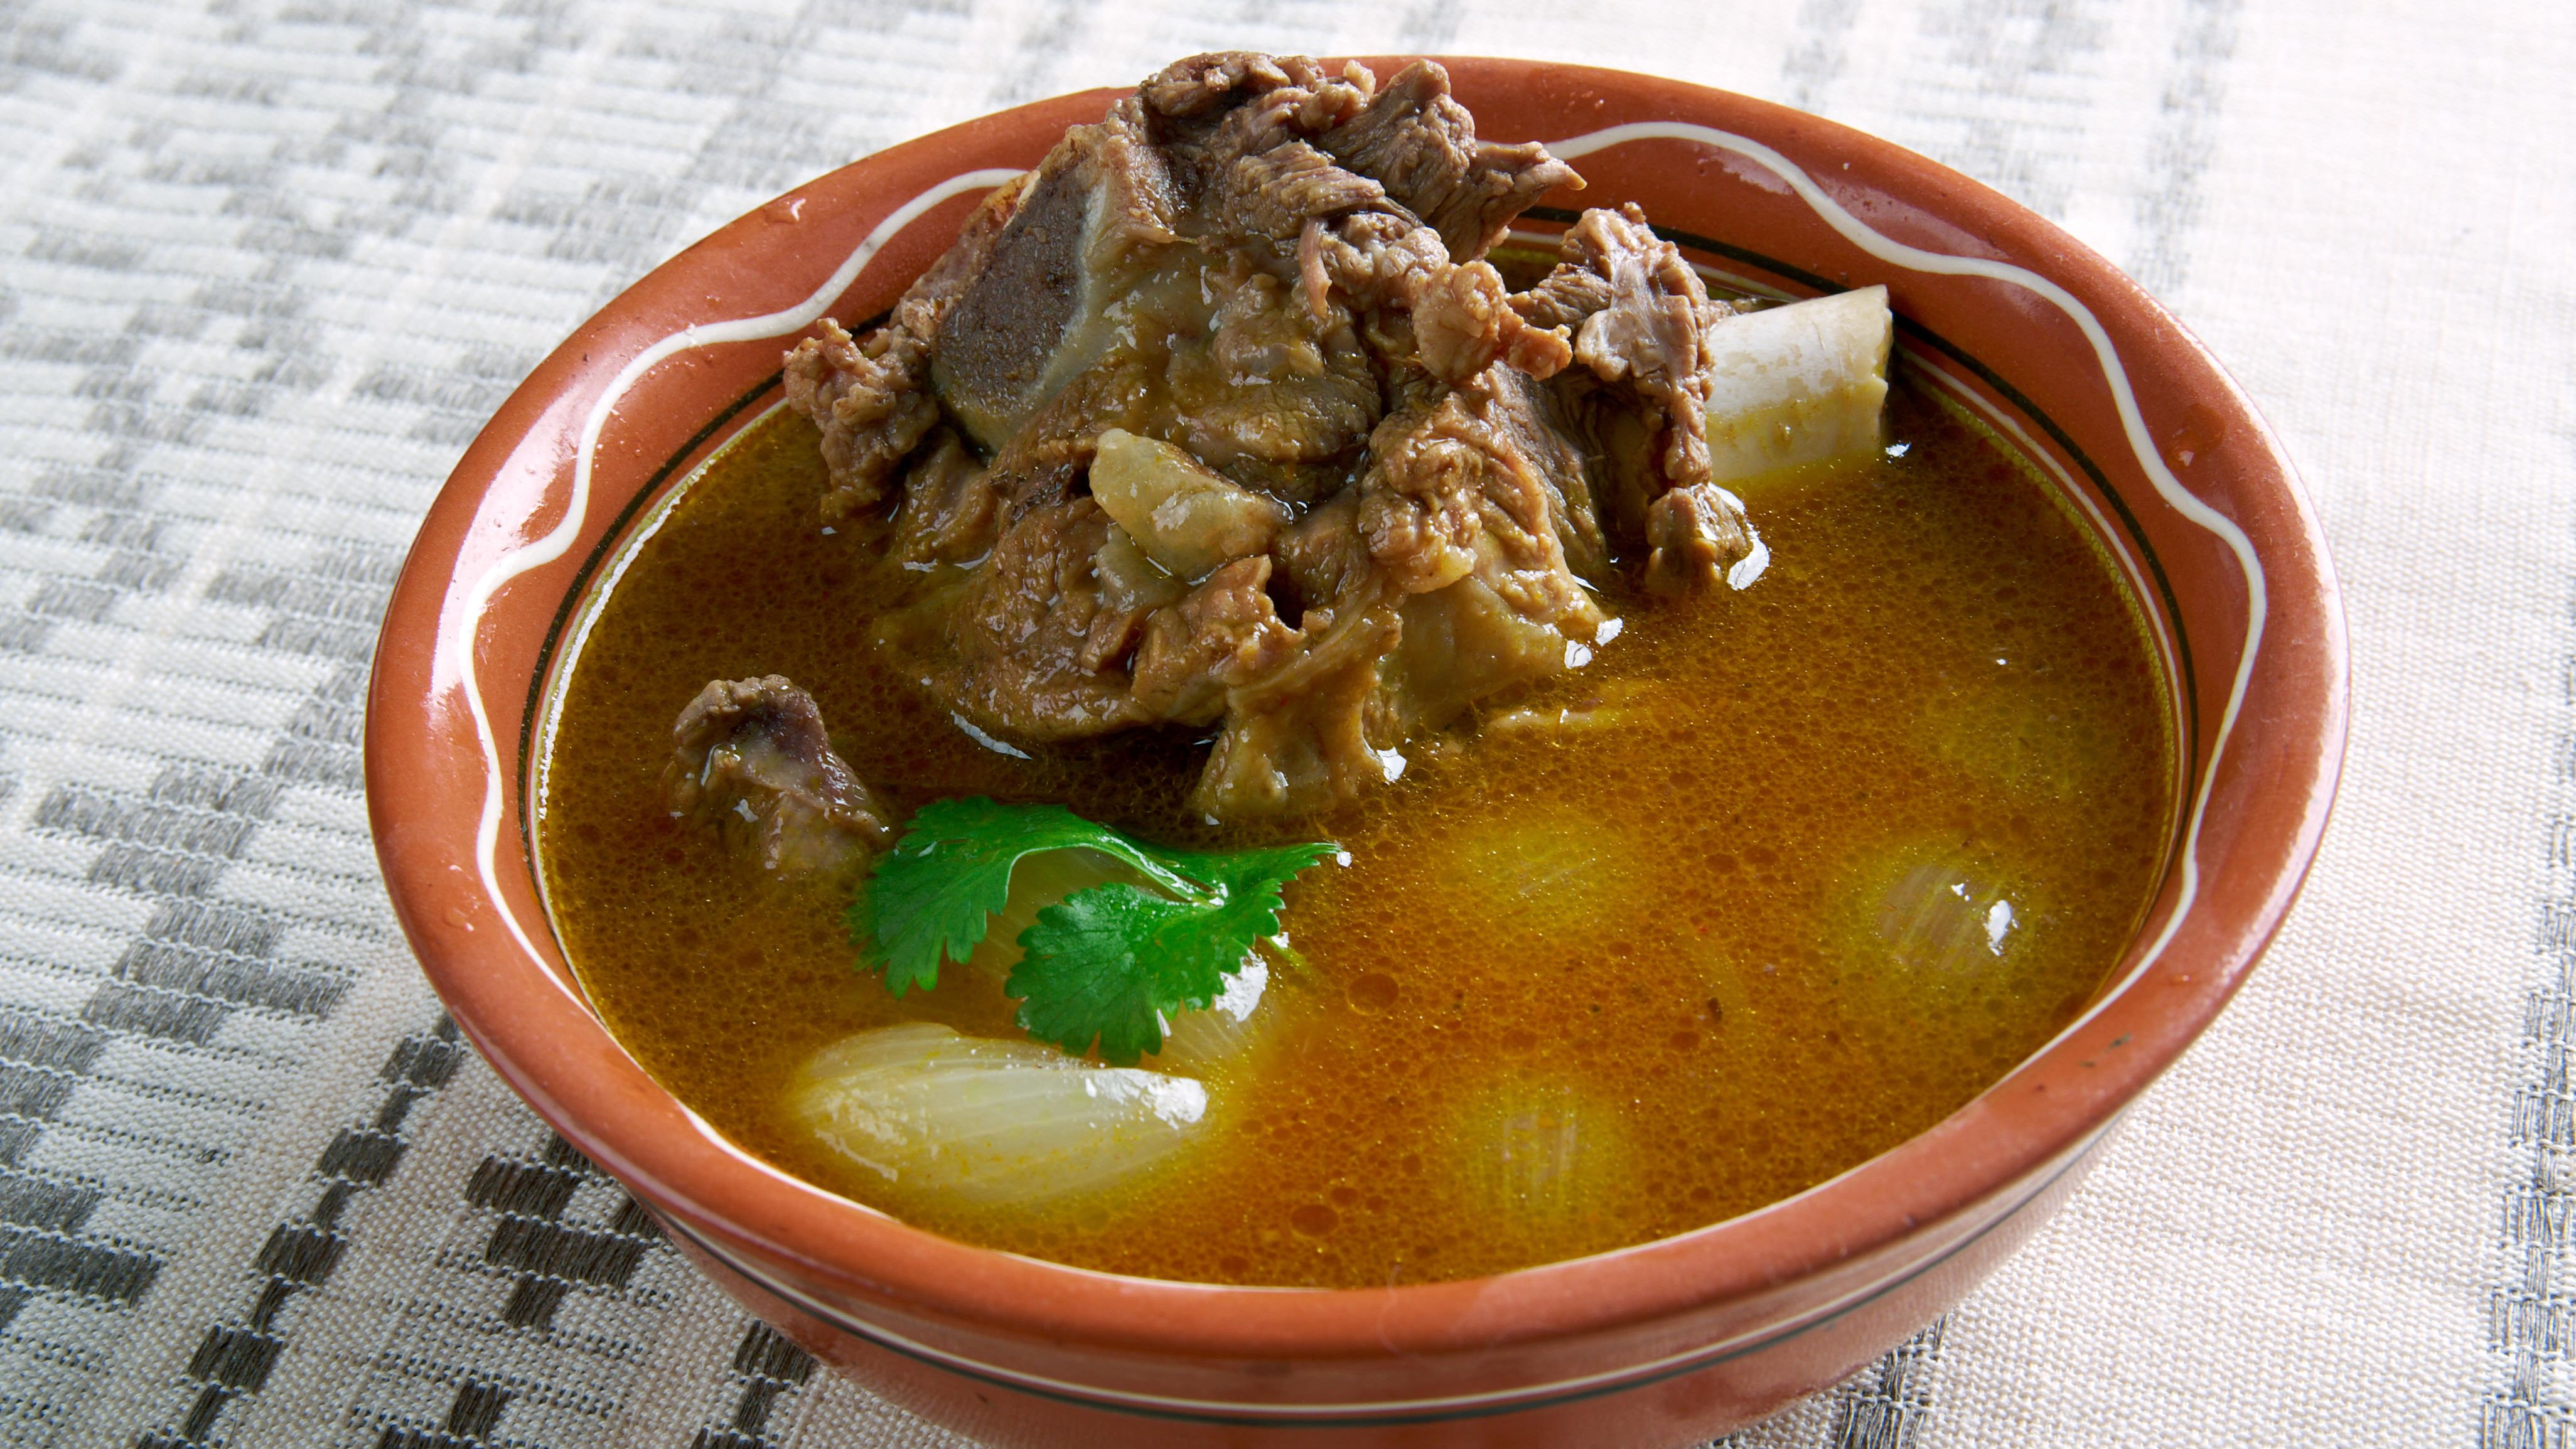 Paya is slow cooked to make the meat tender.